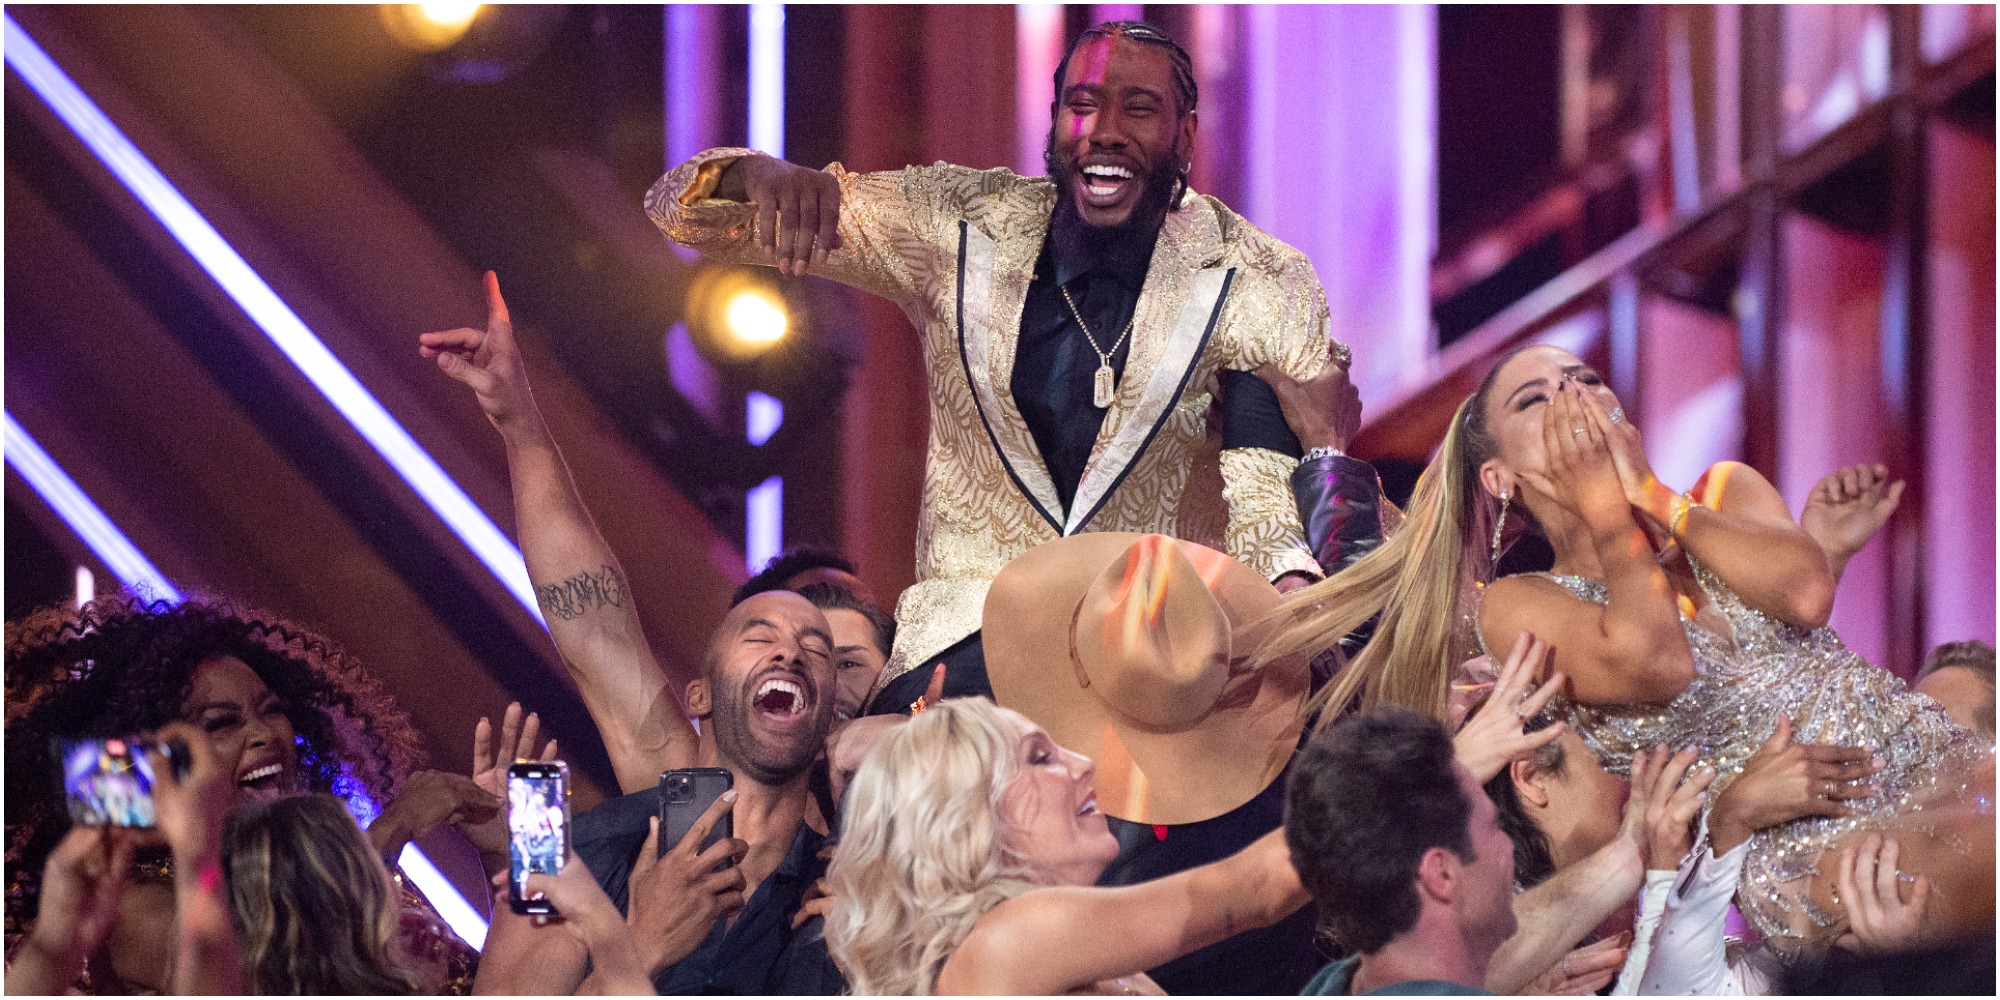 Iman Shumpert and Daniella Karagach are the winners of Dancing with the Stars.